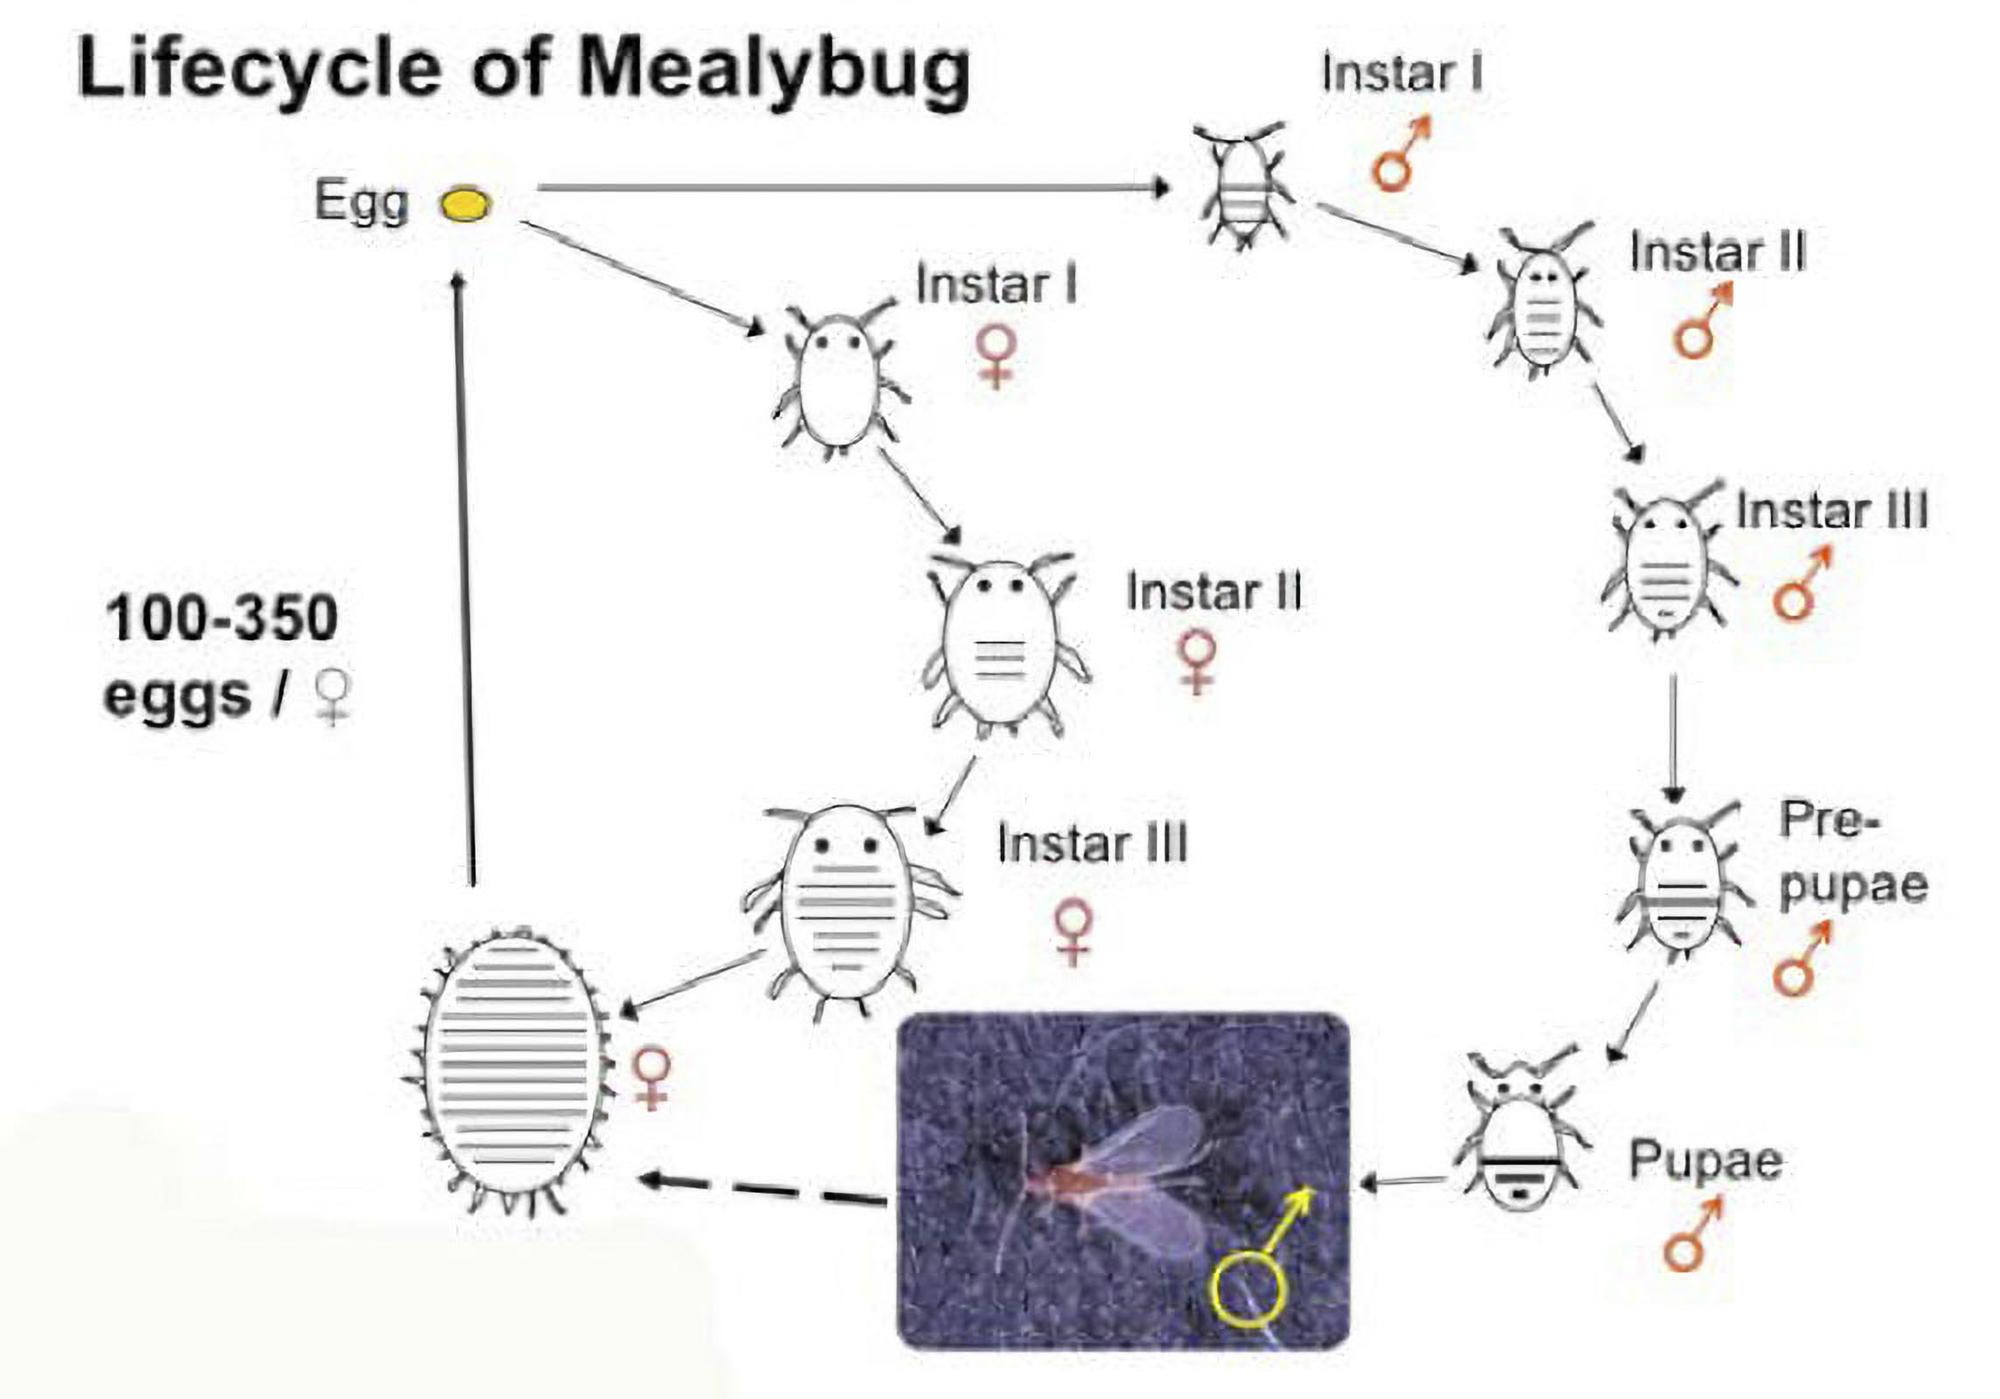 The lifecycle of the mealybug.